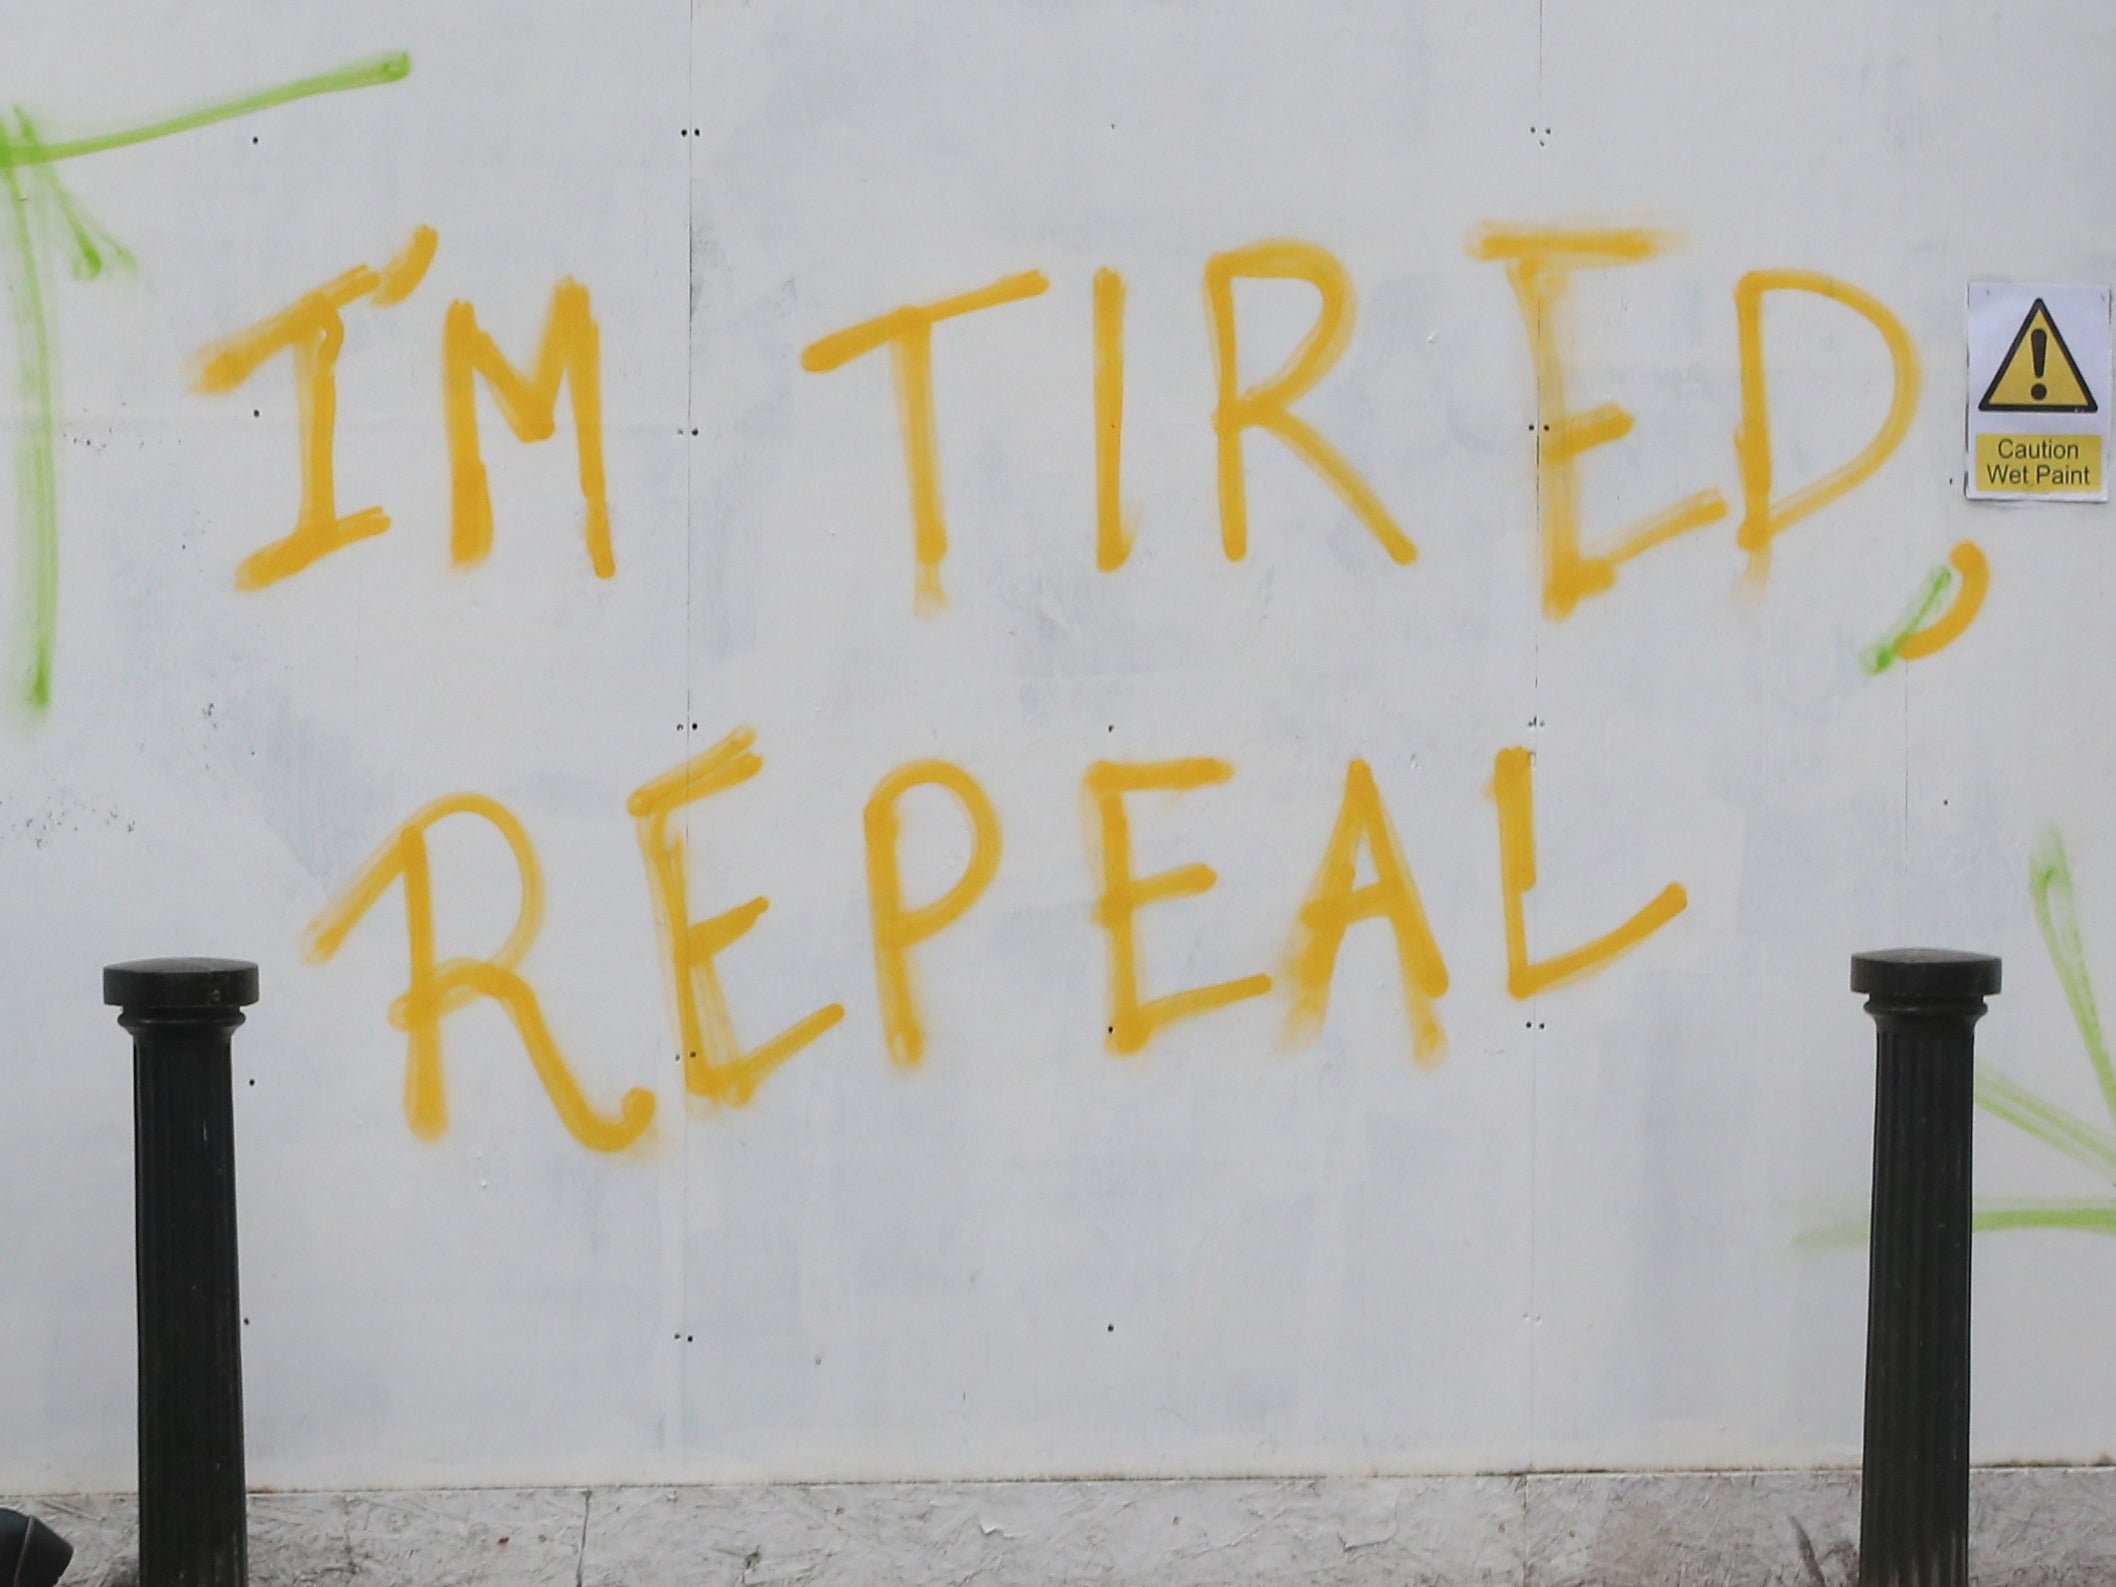 Graffiti on Pearse Street in Dublin, calling for a referendum to repeal the 8th Amendment of the Constitution of Ireland